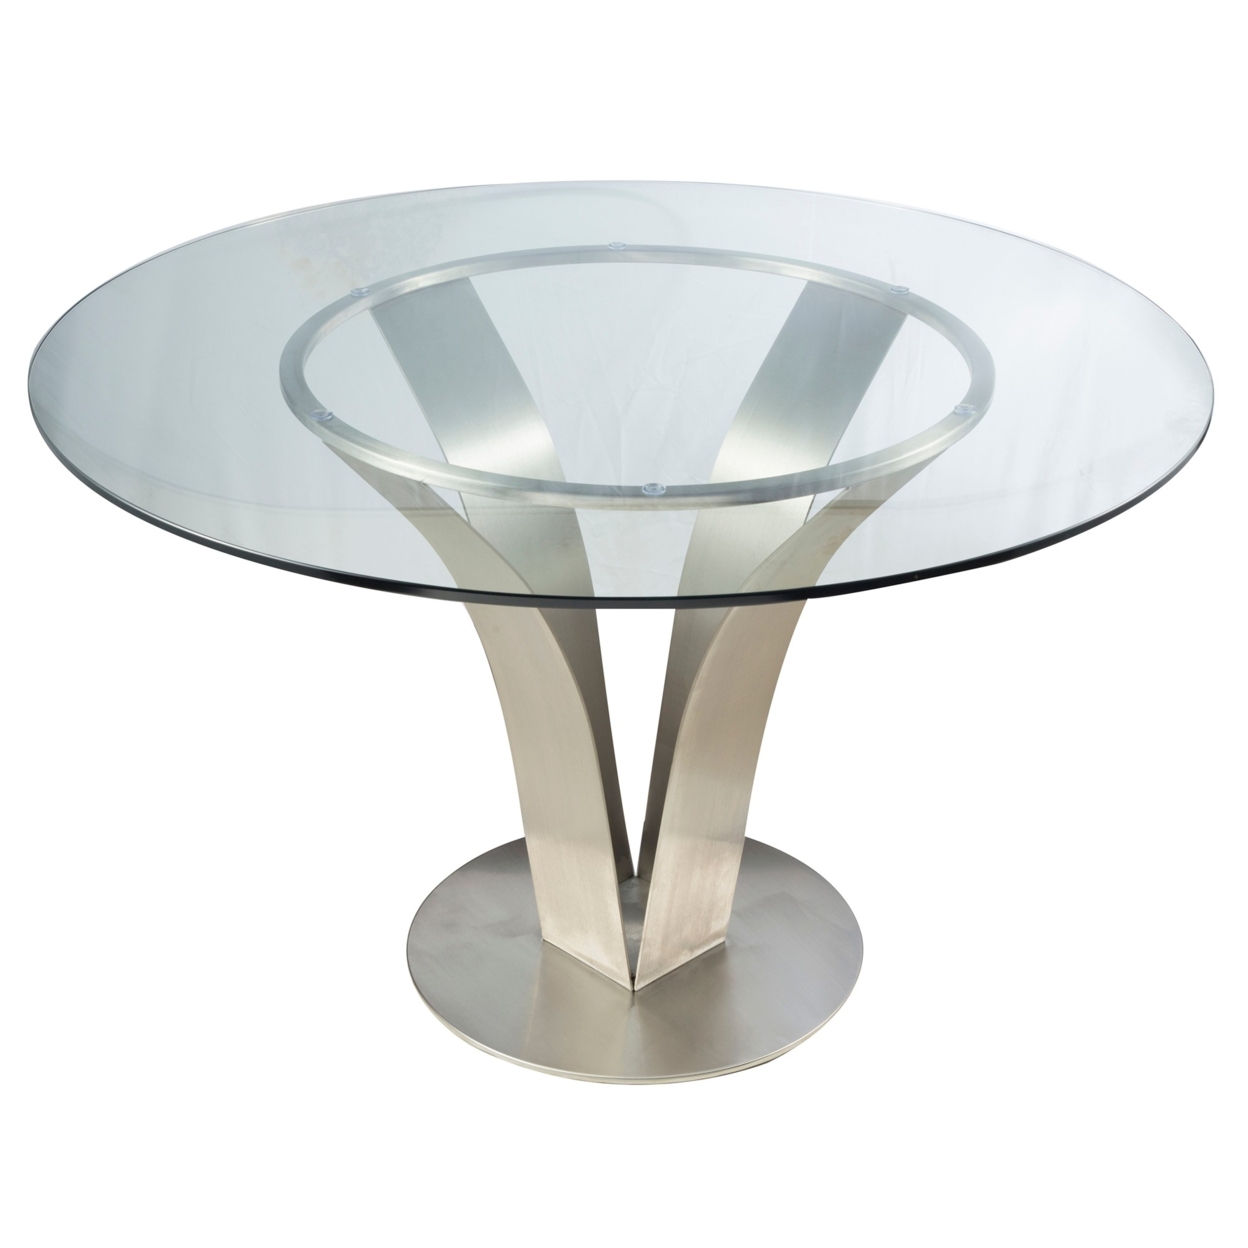 48 Inch Dining Table With Round Glass Top And Metal Base, Chrome- Saltoro Sherpi